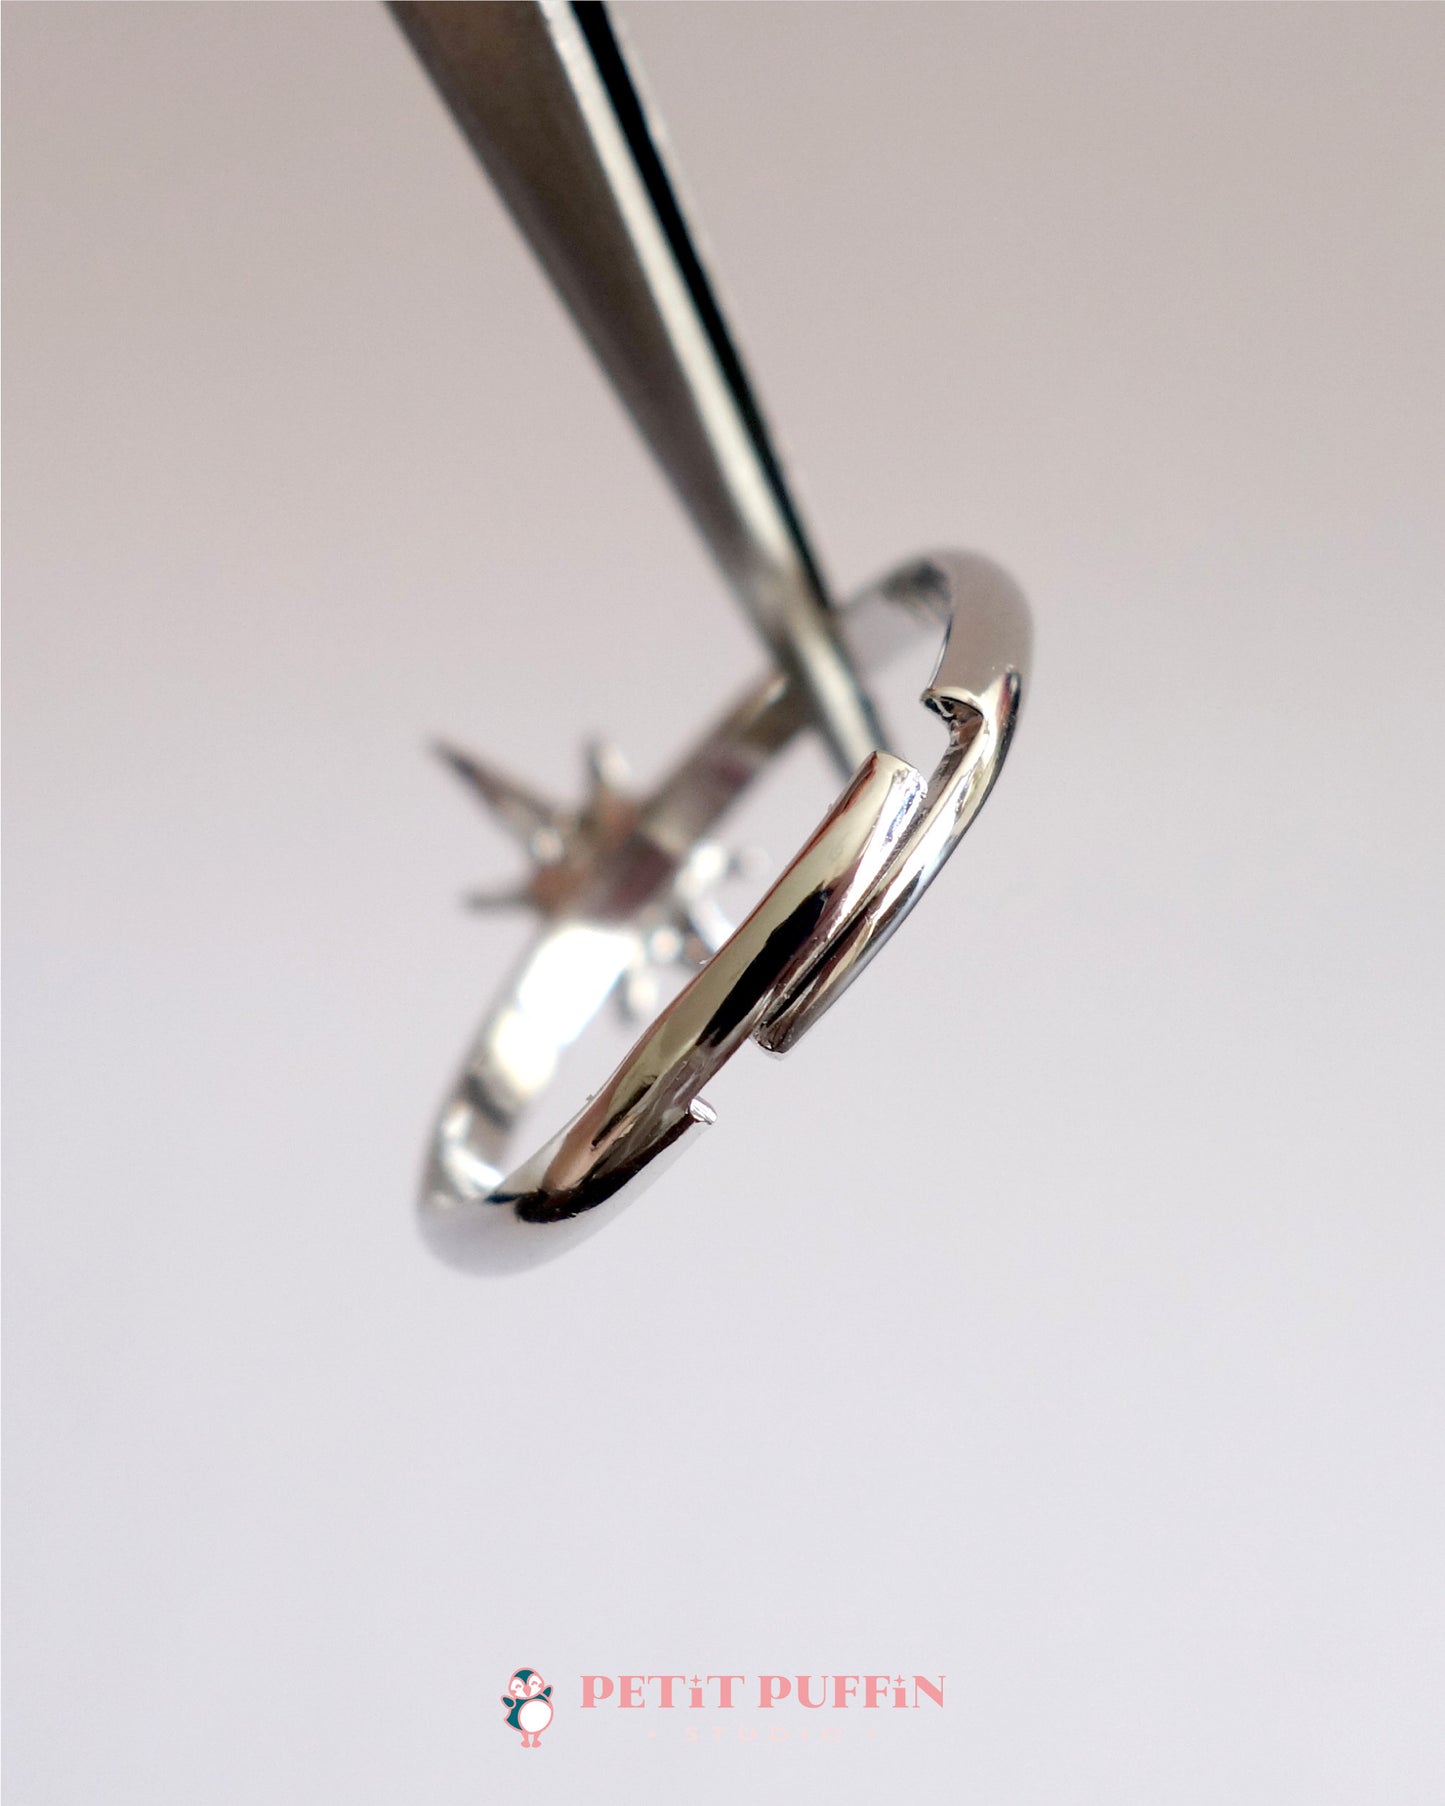 The Long Journey - "compass rose" adjustable ring